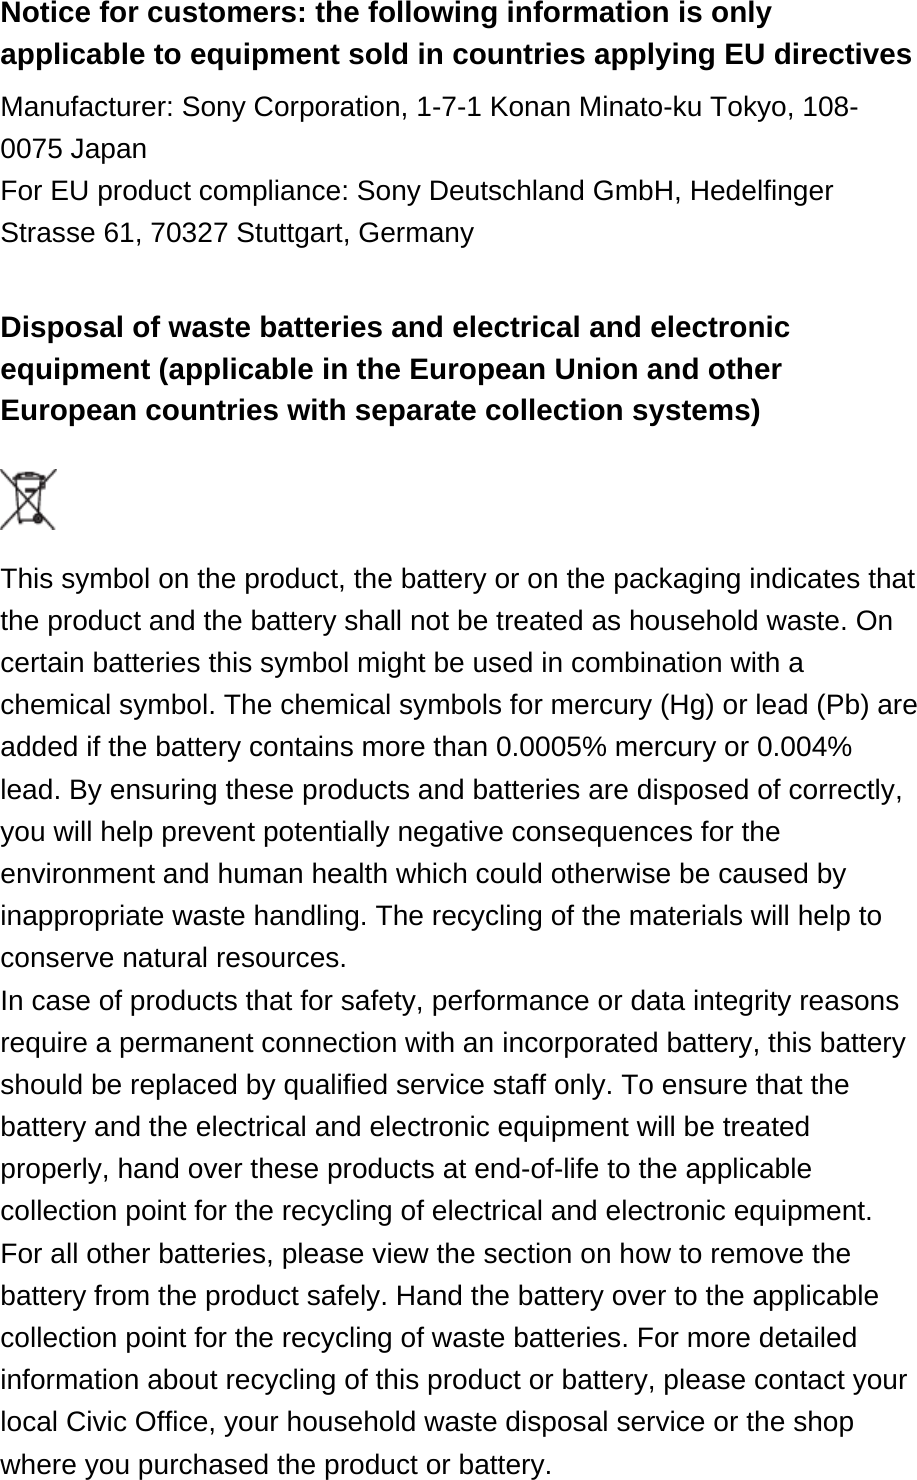 Notice for customers: the following information is only applicable to equipment sold in countries applying EU directives Manufacturer: Sony Corporation, 1-7-1 Konan Minato-ku Tokyo, 108-0075 JapanFor EU product compliance: Sony Deutschland GmbH, Hedelfinger Strasse 61, 70327 Stuttgart, Germany Disposal of waste batteries and electrical and electronic equipment (applicable in the European Union and other European countries with separate collection systems)  This symbol on the product, the battery or on the packaging indicates that the product and the battery shall not be treated as household waste. On certain batteries this symbol might be used in combination with a chemical symbol. The chemical symbols for mercury (Hg) or lead (Pb) are added if the battery contains more than 0.0005% mercury or 0.004% lead. By ensuring these products and batteries are disposed of correctly, you will help prevent potentially negative consequences for the environment and human health which could otherwise be caused by inappropriate waste handling. The recycling of the materials will help to conserve natural resources.In case of products that for safety, performance or data integrity reasons require a permanent connection with an incorporated battery, this battery should be replaced by qualified service staff only. To ensure that the battery and the electrical and electronic equipment will be treated properly, hand over these products at end-of-life to the applicable collection point for the recycling of electrical and electronic equipment. For all other batteries, please view the section on how to remove the battery from the product safely. Hand the battery over to the applicable collection point for the recycling of waste batteries. For more detailed information about recycling of this product or battery, please contact your local Civic Office, your household waste disposal service or the shop where you purchased the product or battery.